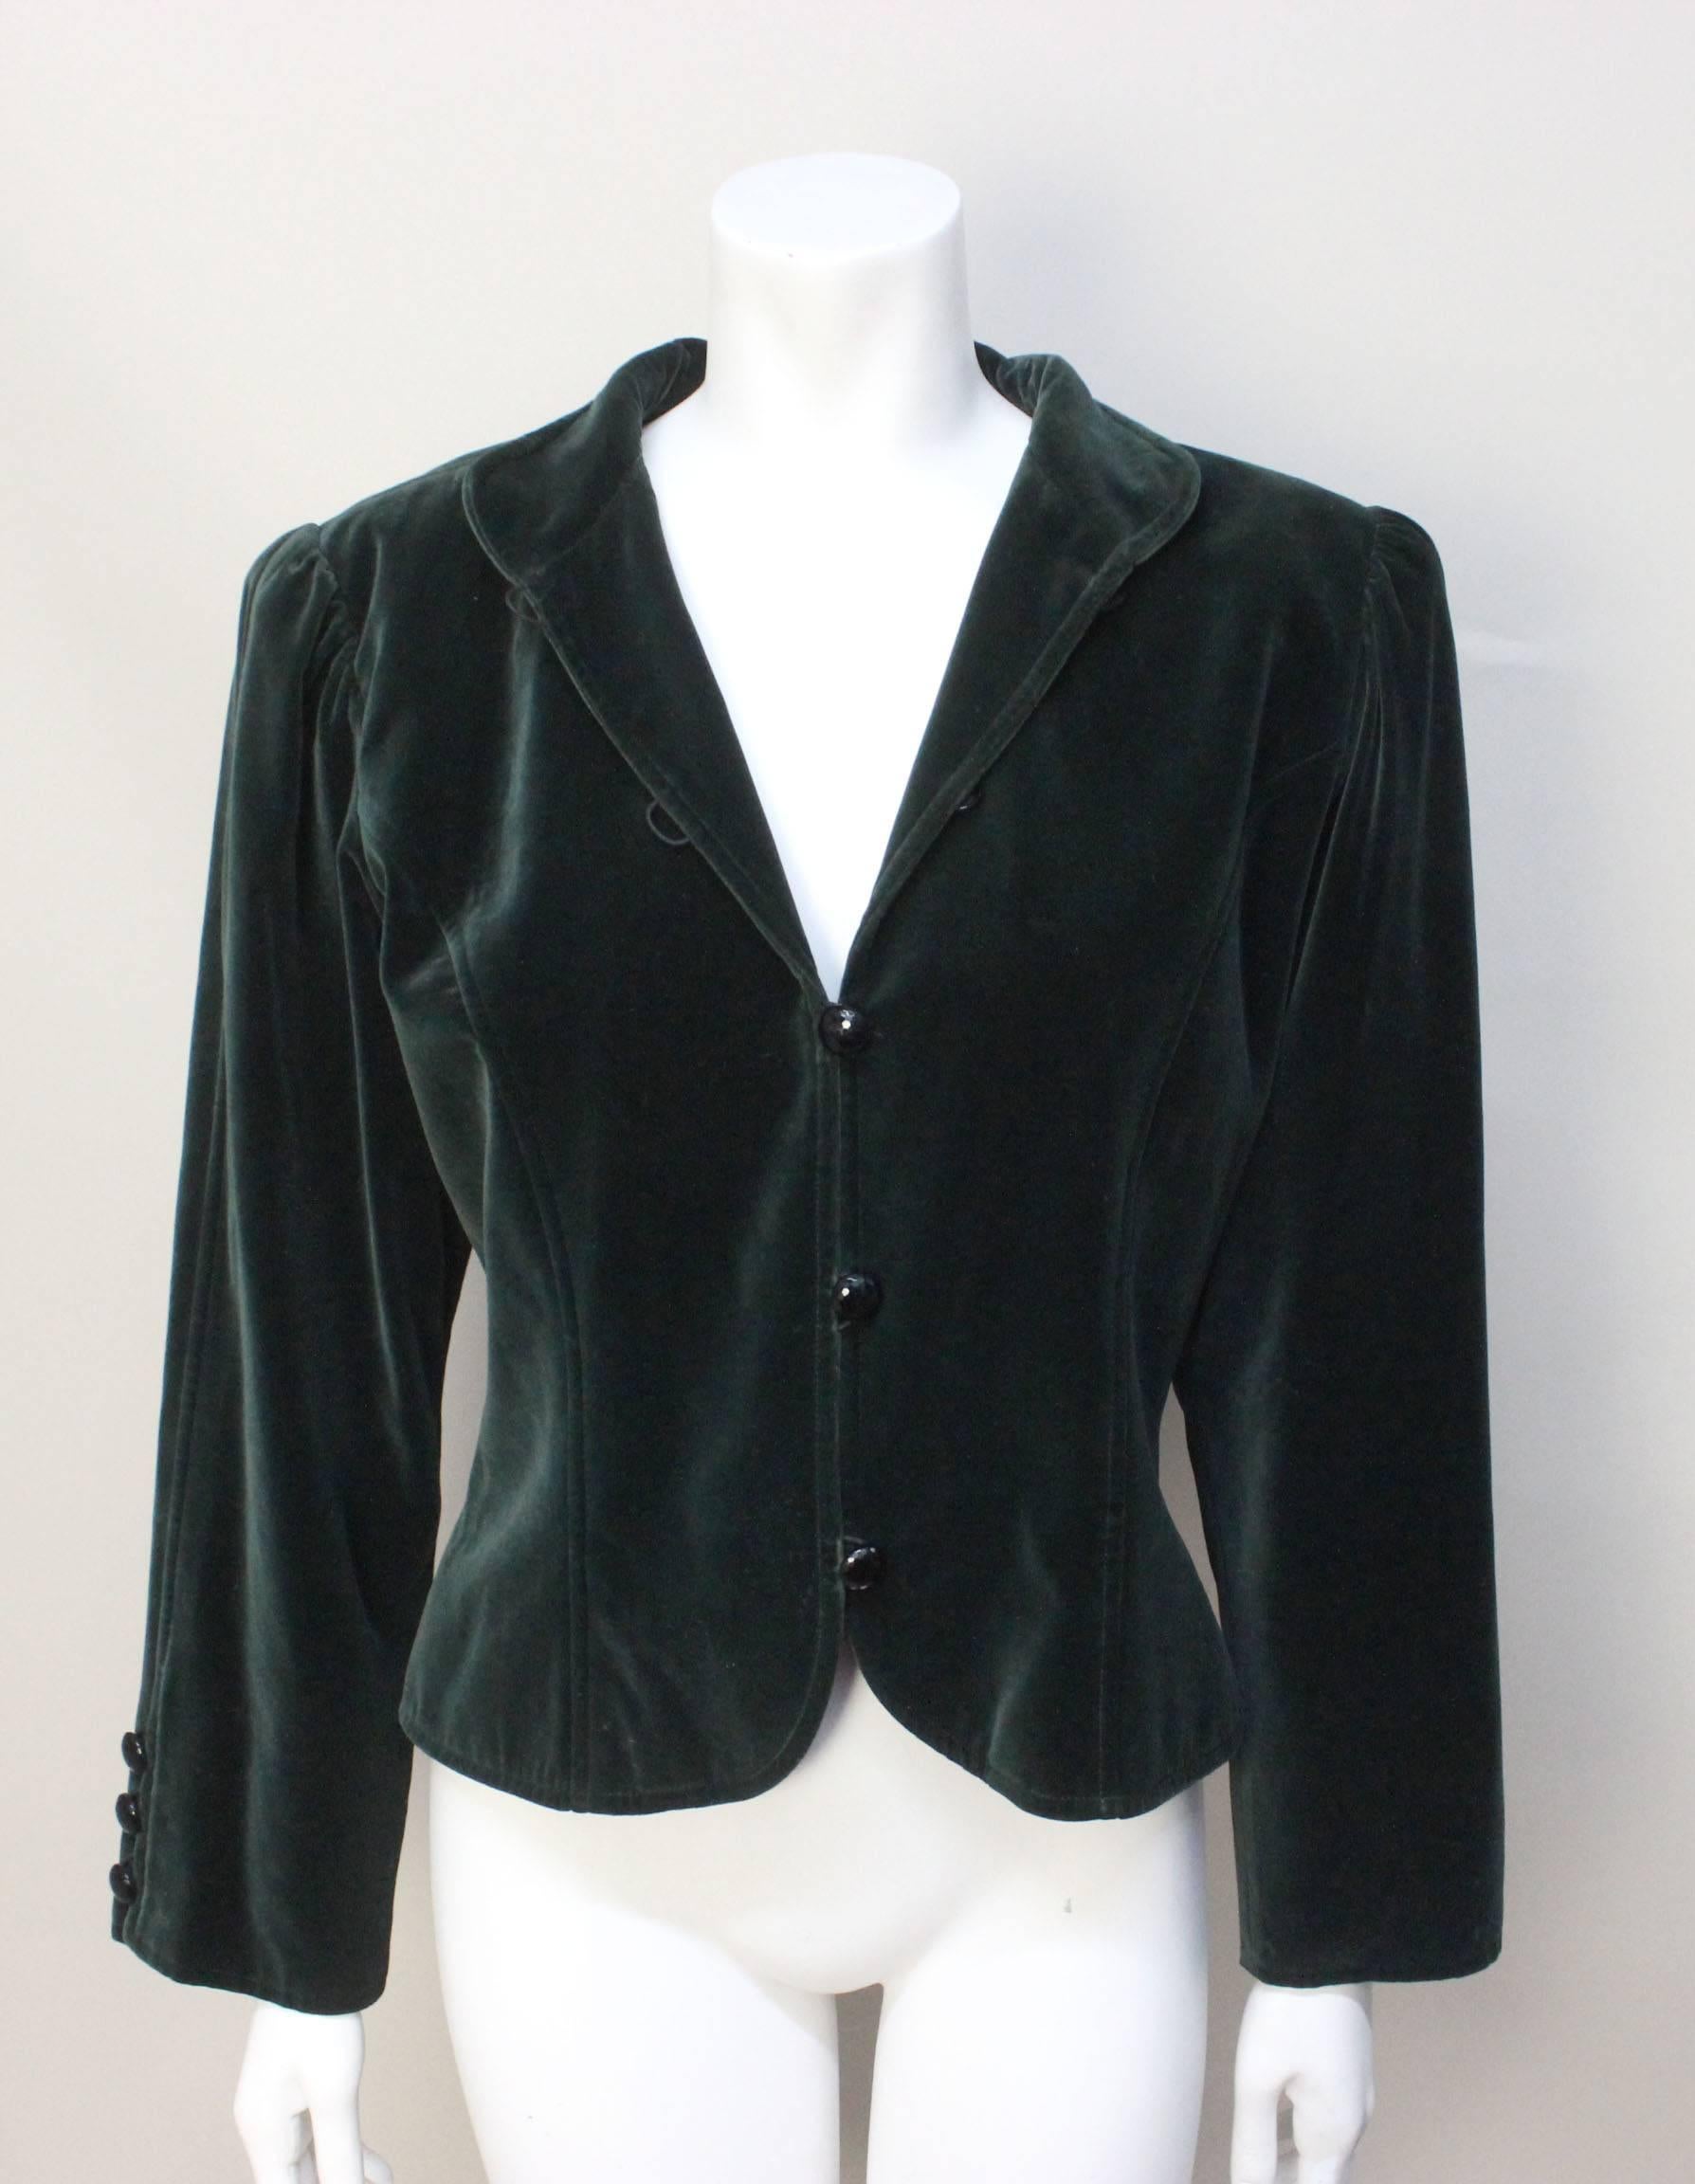 Yves Saint Laurent often referenced folkloric style in his Rive Gauche designs. This rich forest green velvet jacket has some such details with its puffed sleeves and Mandarin collar. The black cushin cut glass buttons add to the jacket's elegance. 